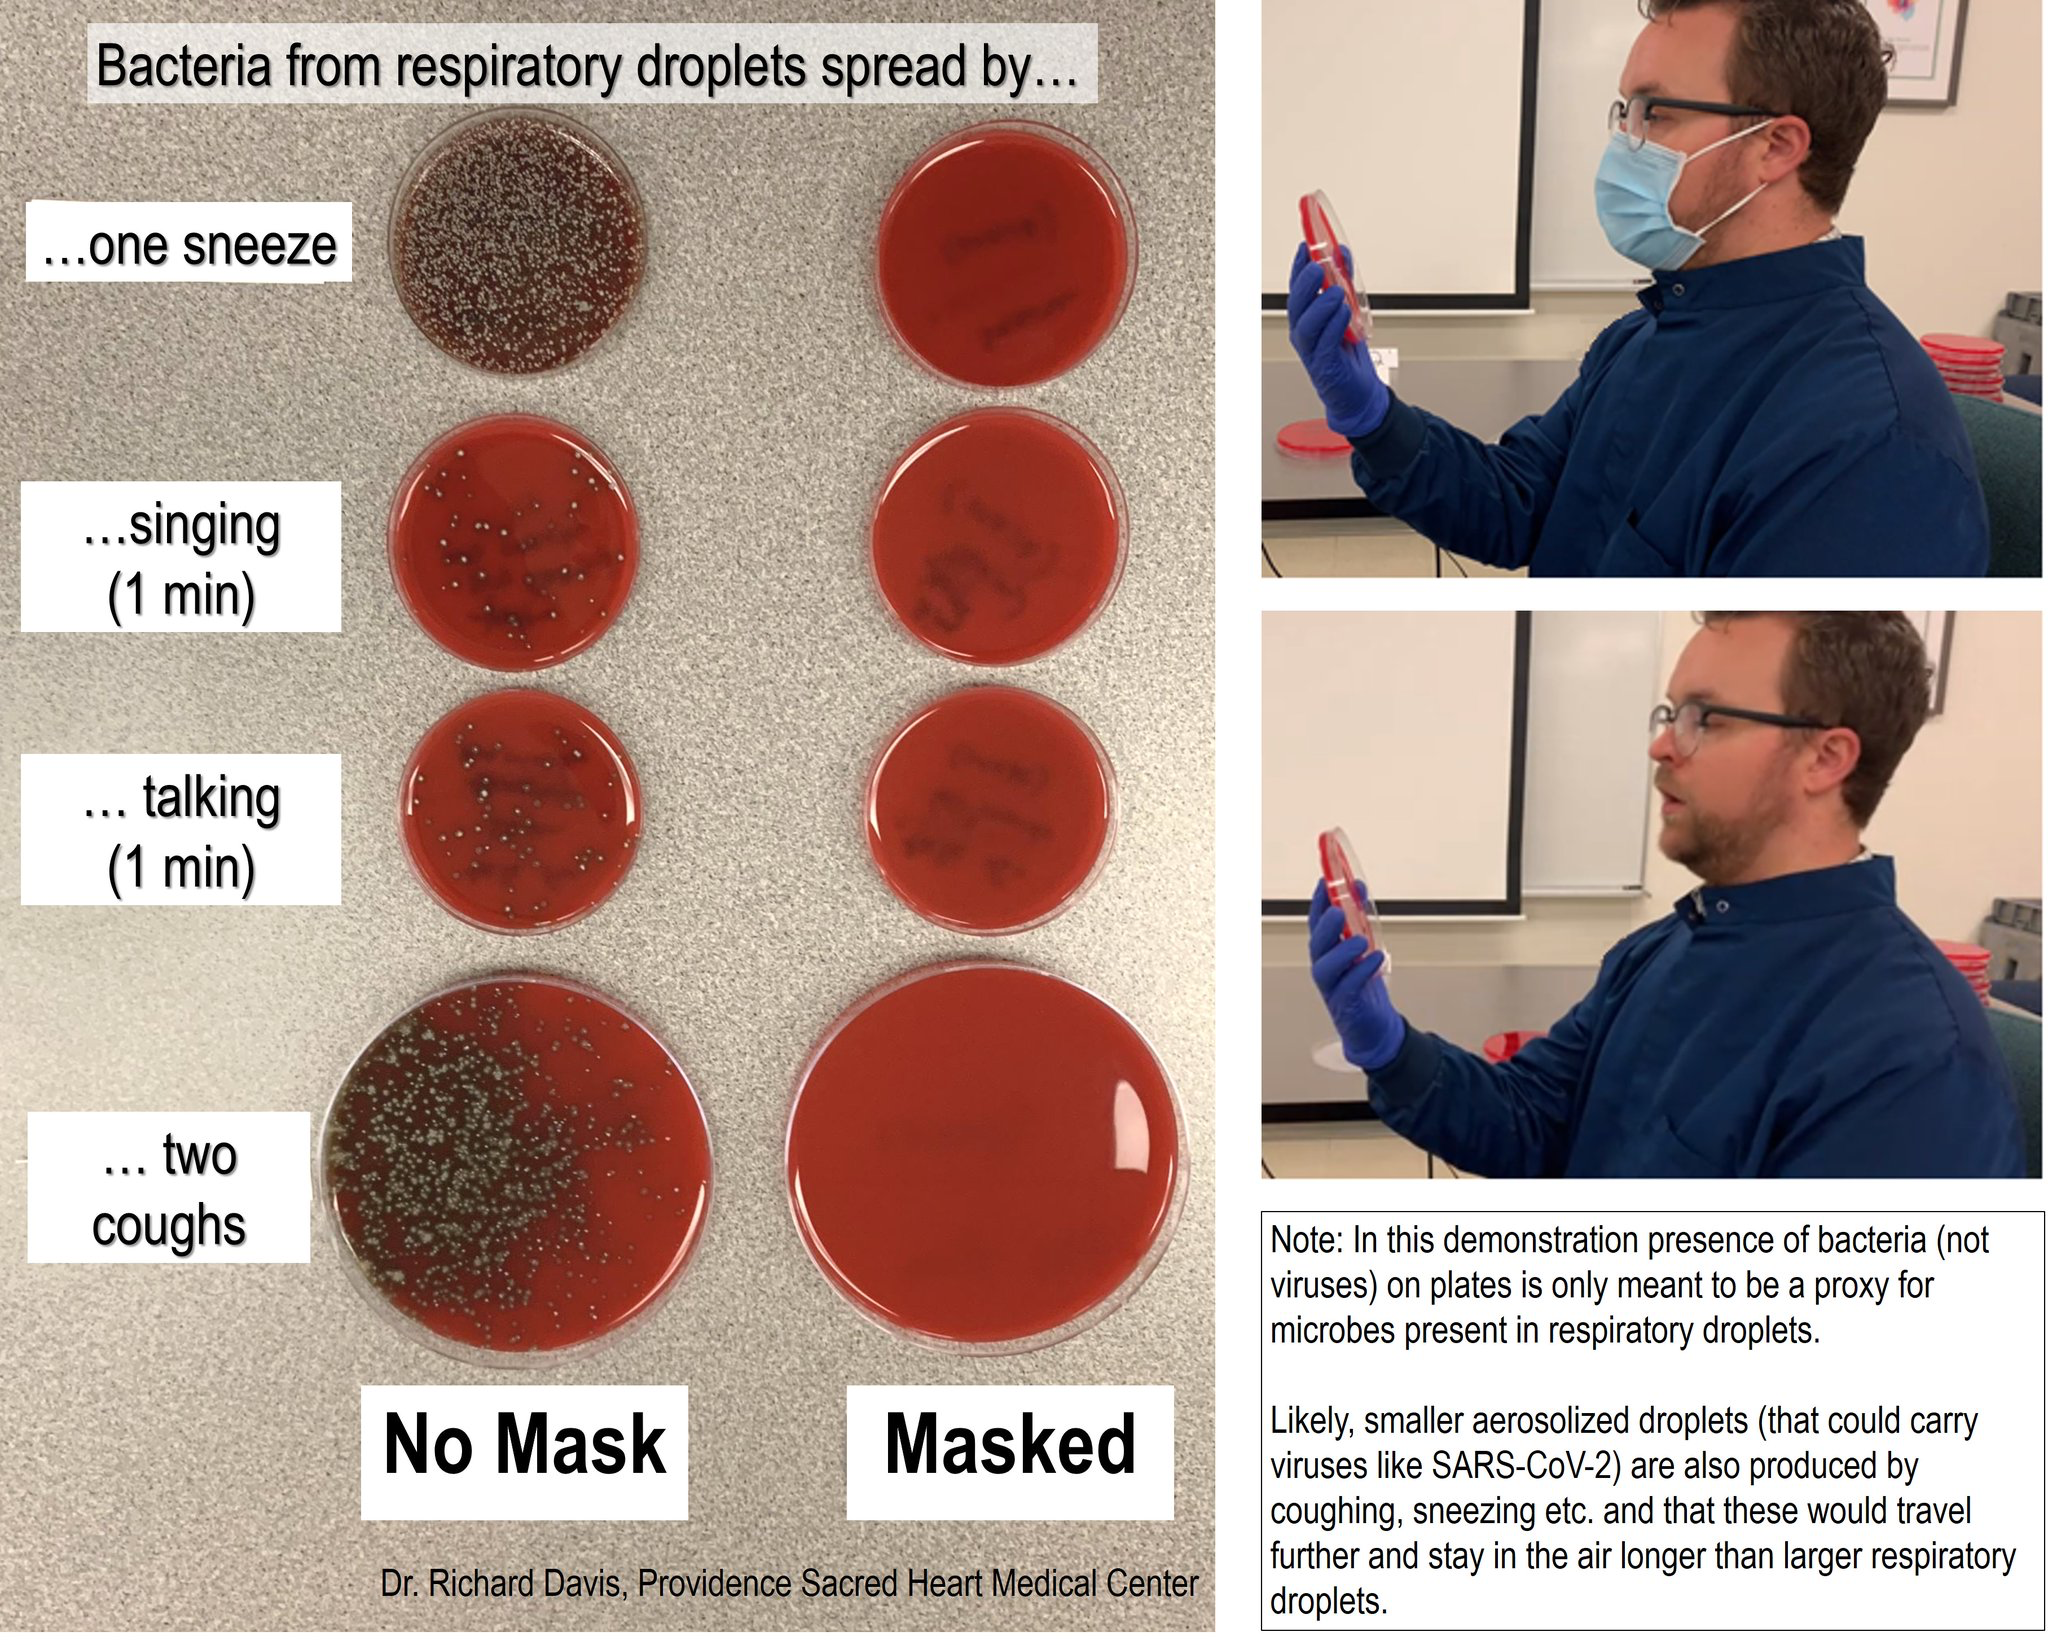 bacteria growth with and without masks